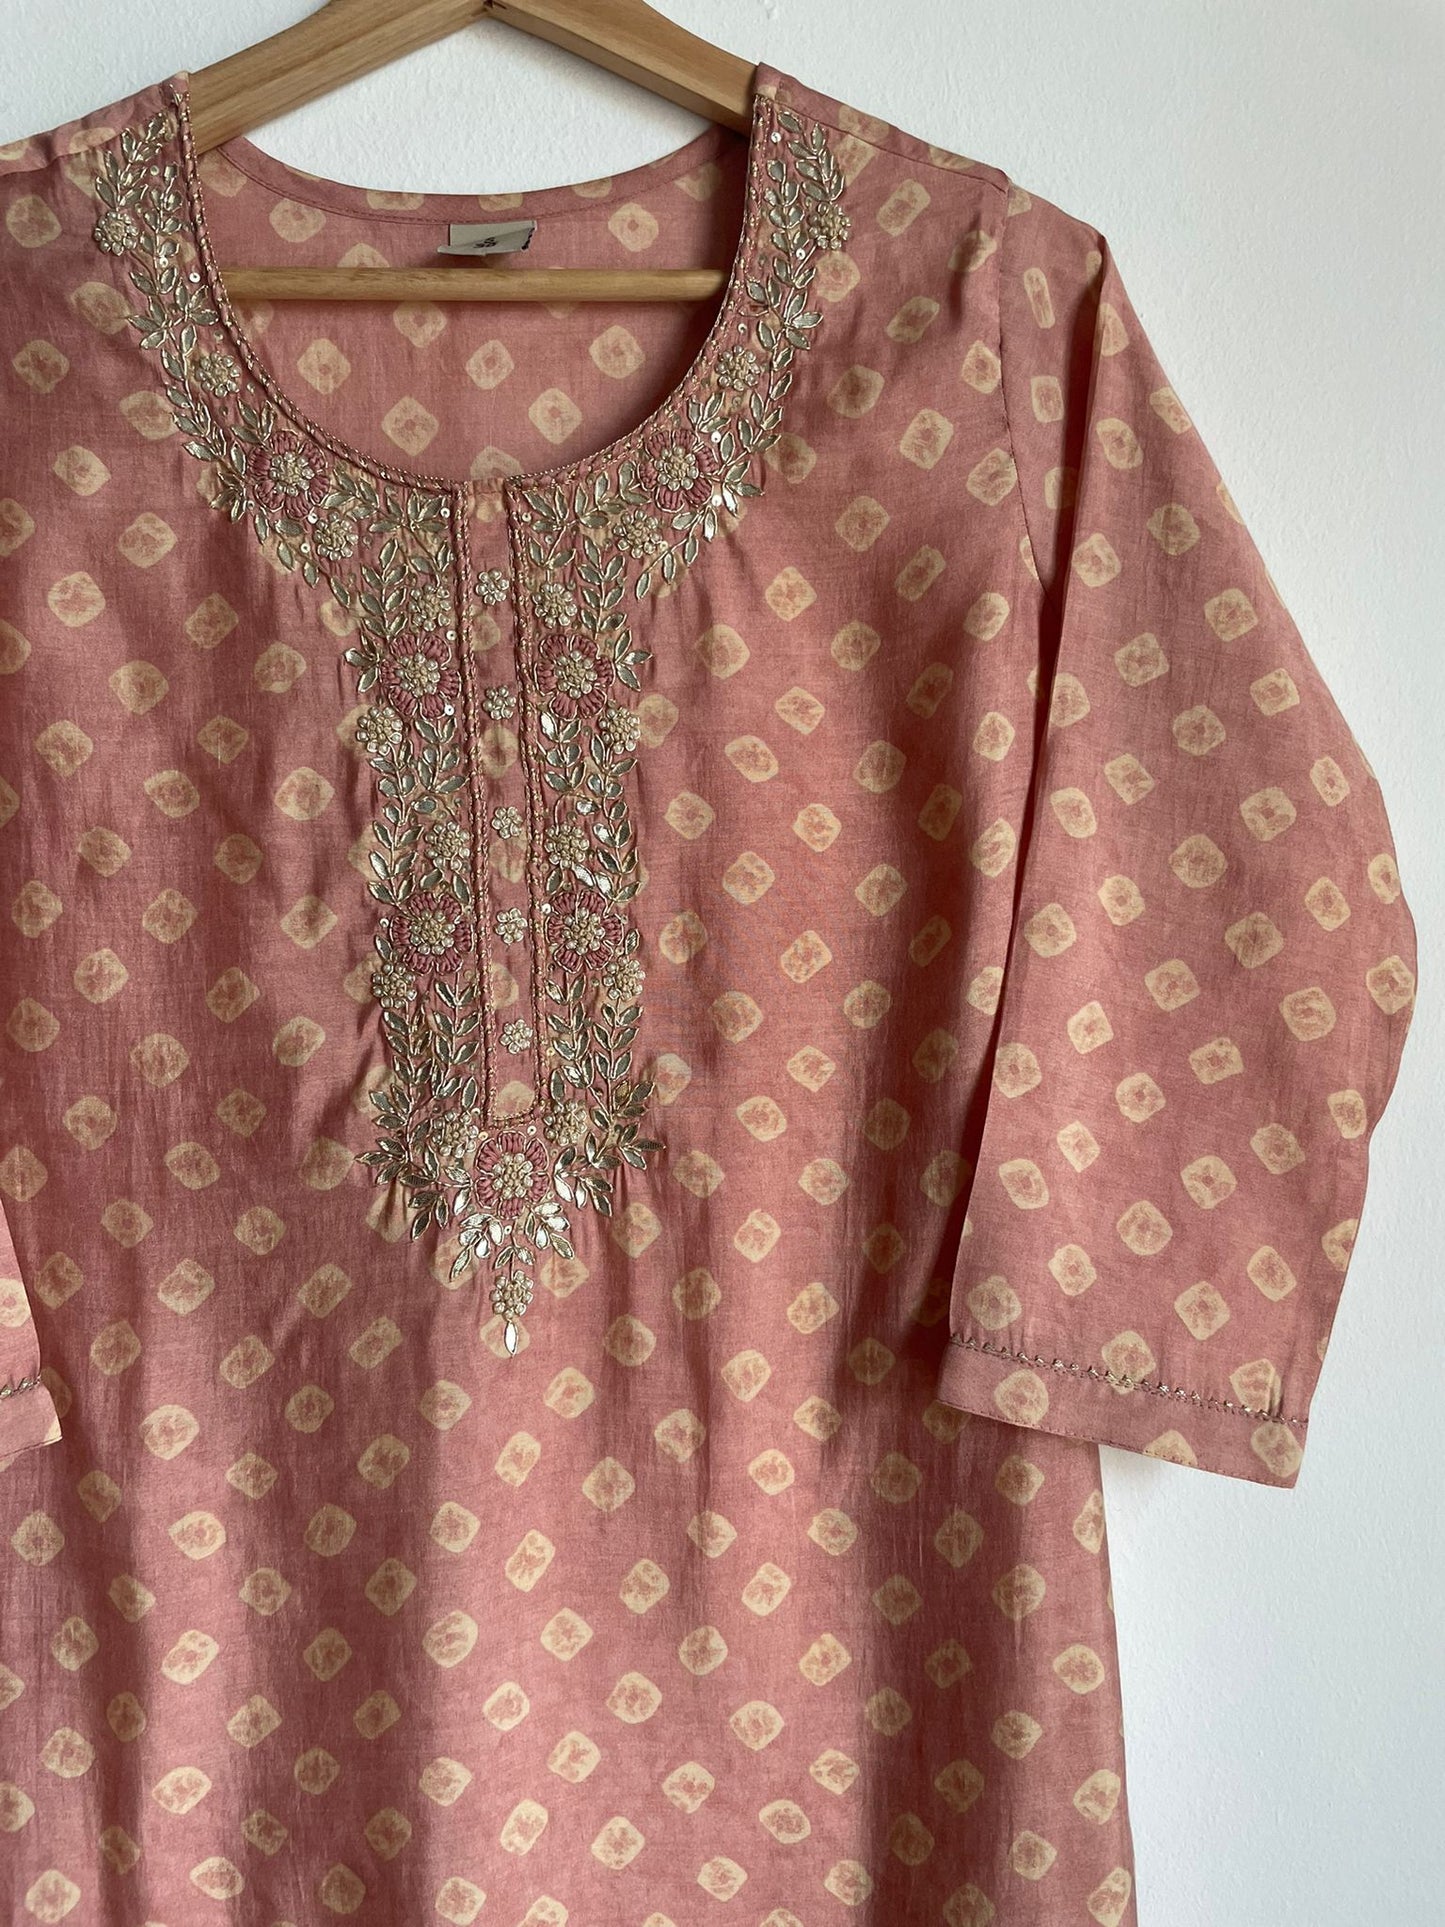 indian embroidered silk suit for women in singapore. affordable and high quality